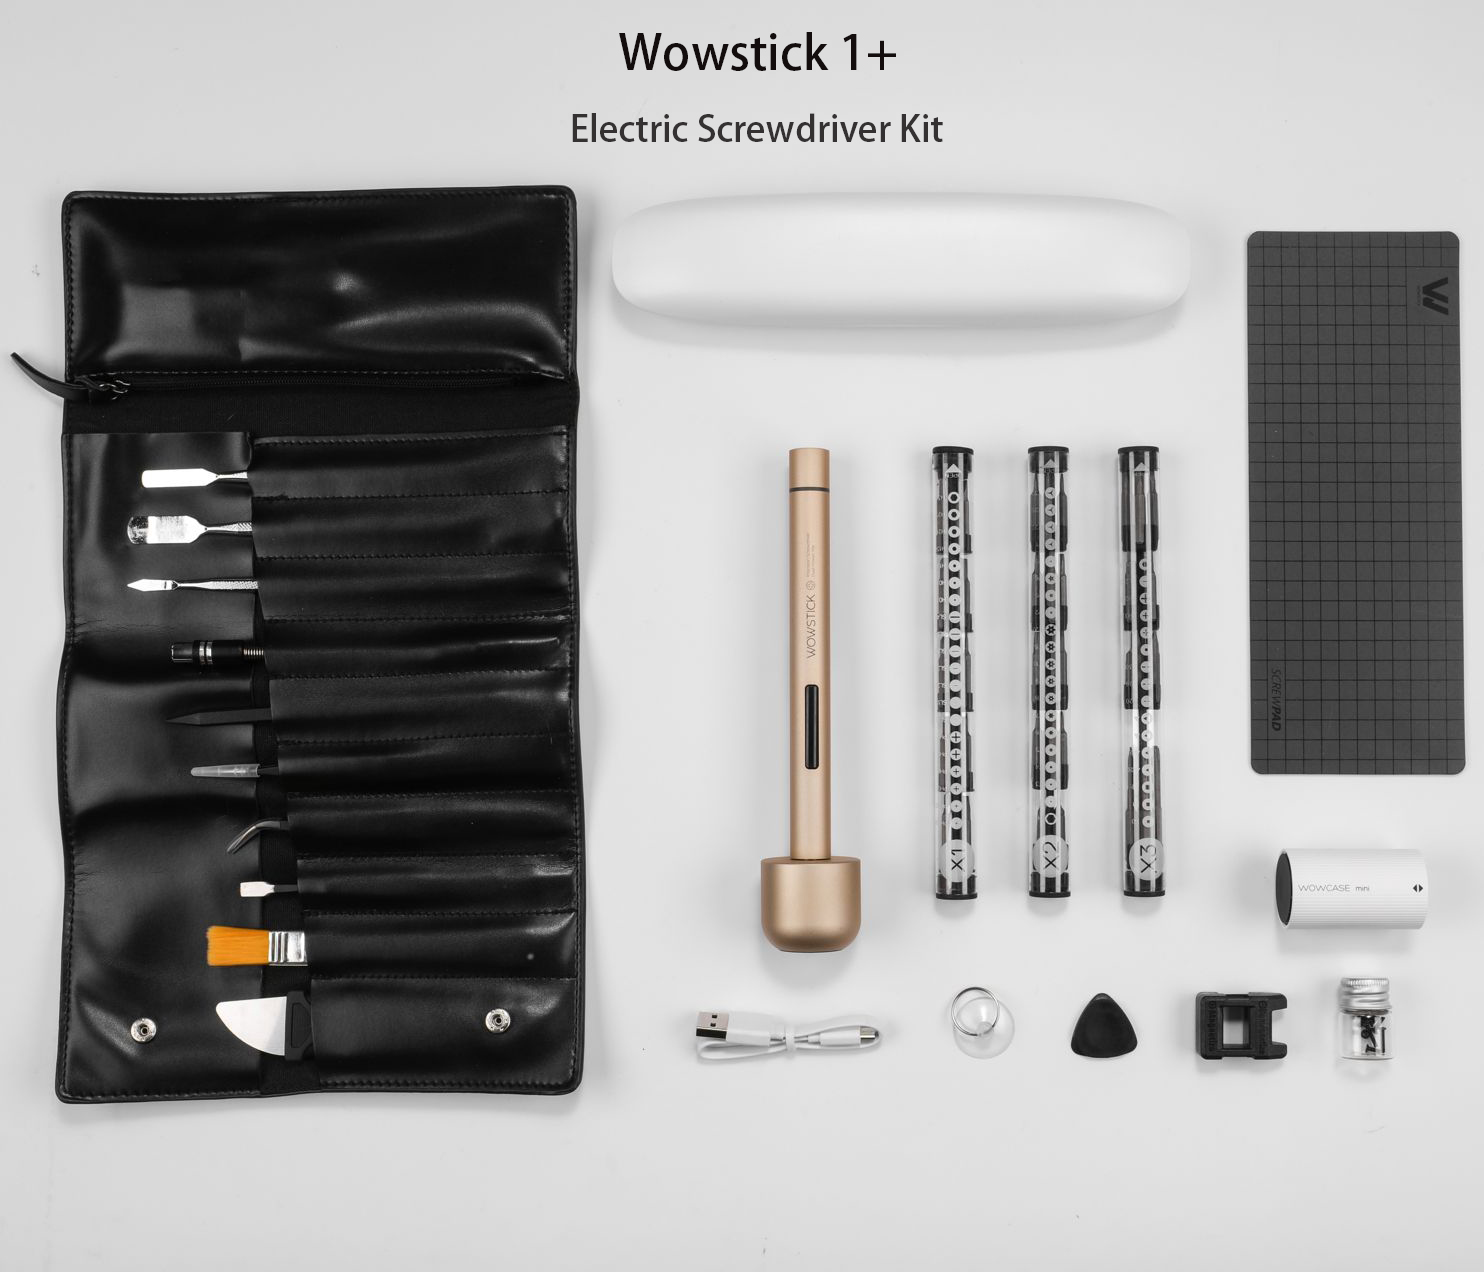 Wowstick-1-Precision-Electric-Screwdriver-Set-Cordless-Chargeable-DIY-Repair-Tools-Kit-1365110-4